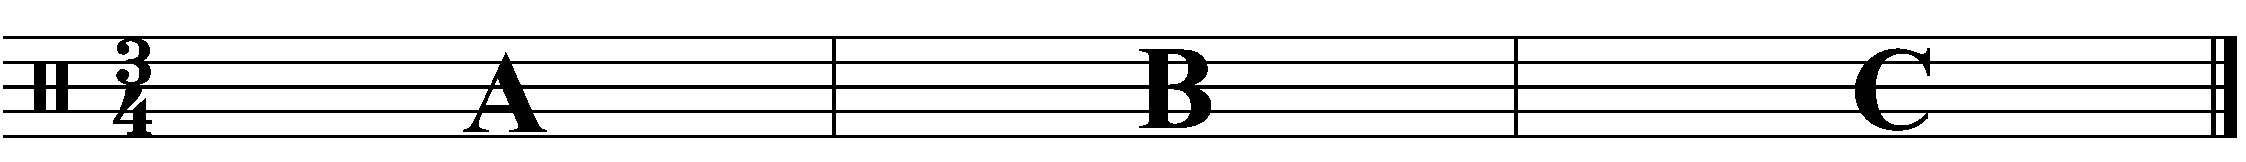 A three bar phrase made up of 3 different sections in the time signature of 3/4.